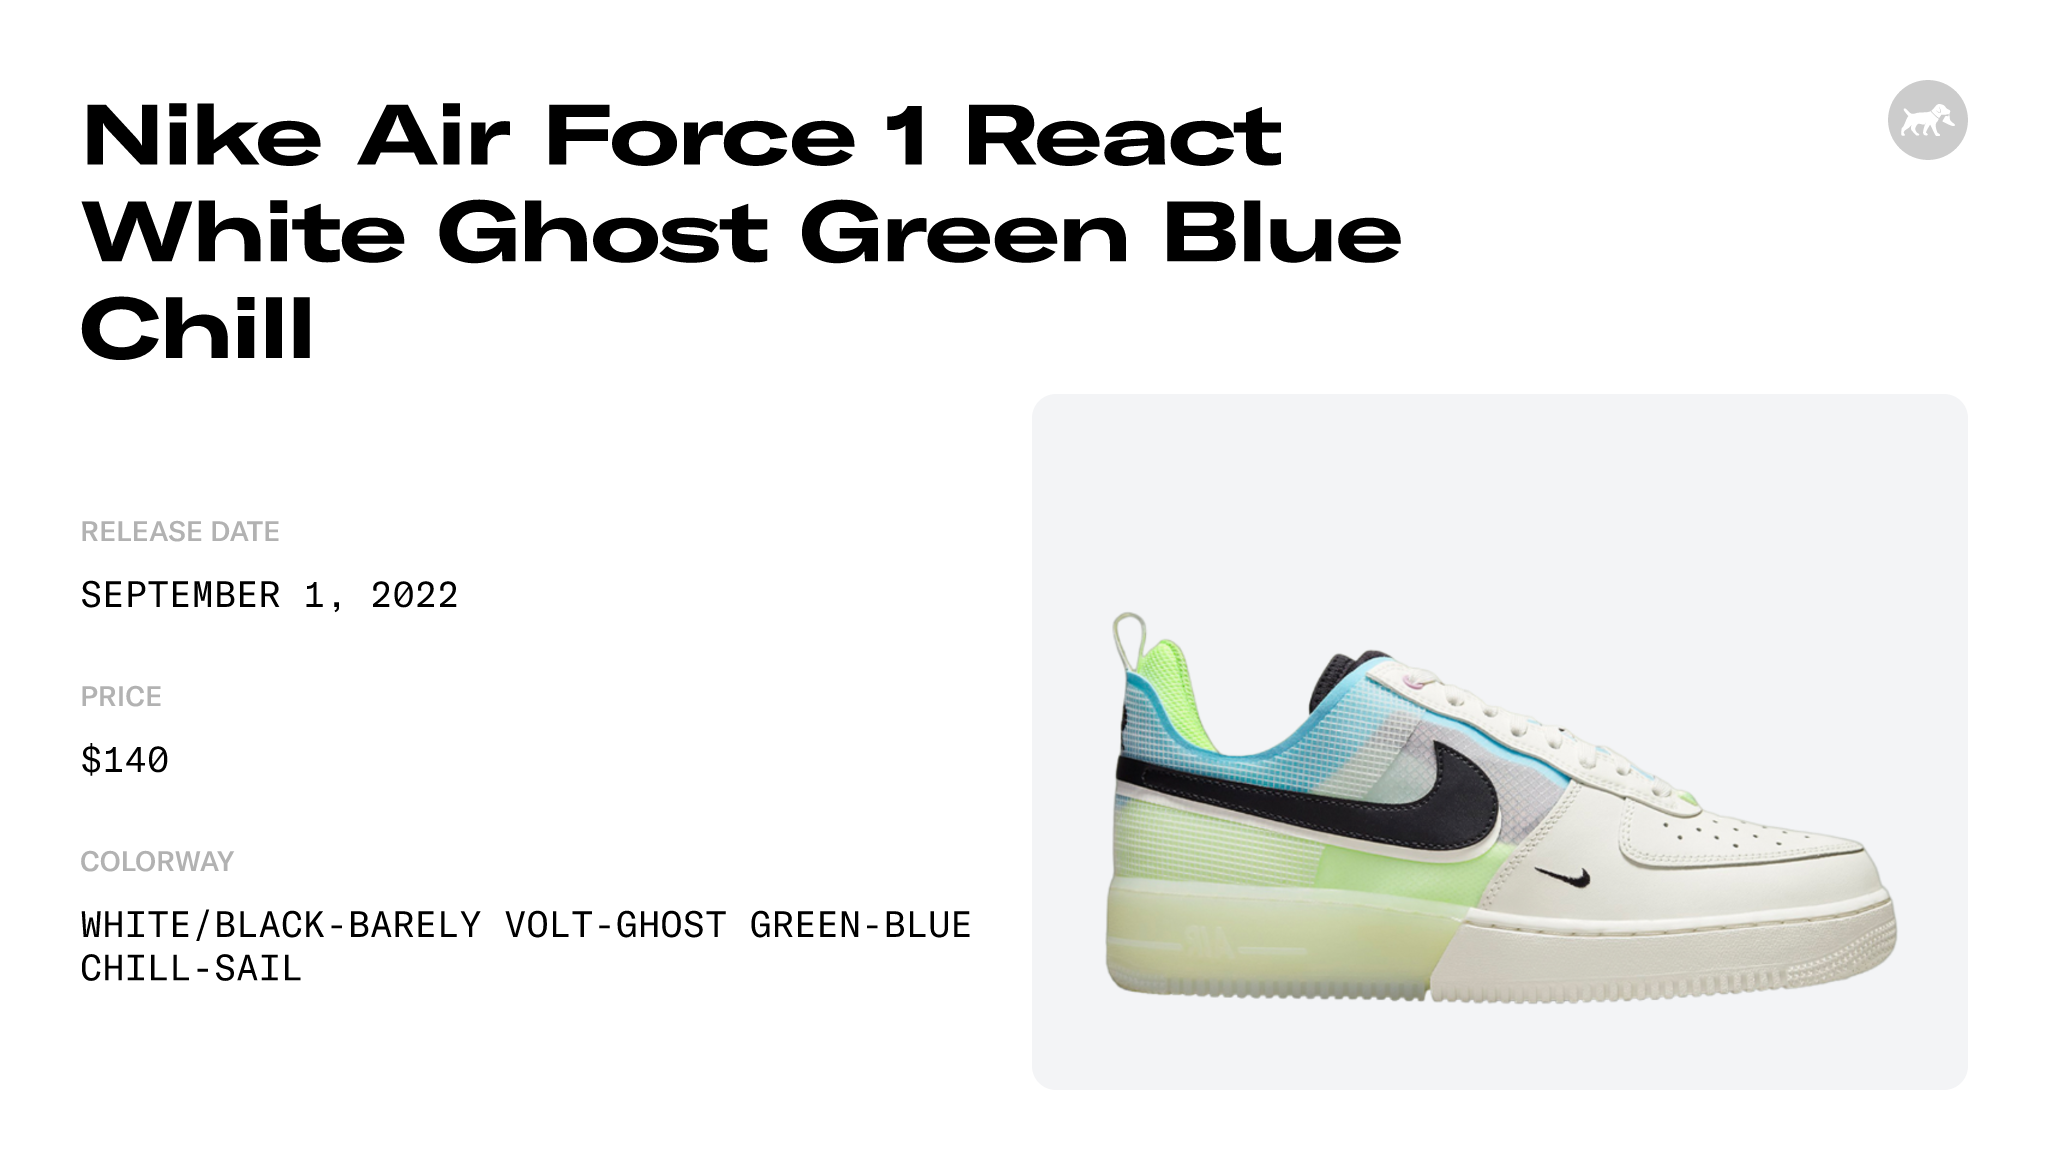 Nike Air Force 1 Mid React sneakers in sail white, black and ghost green